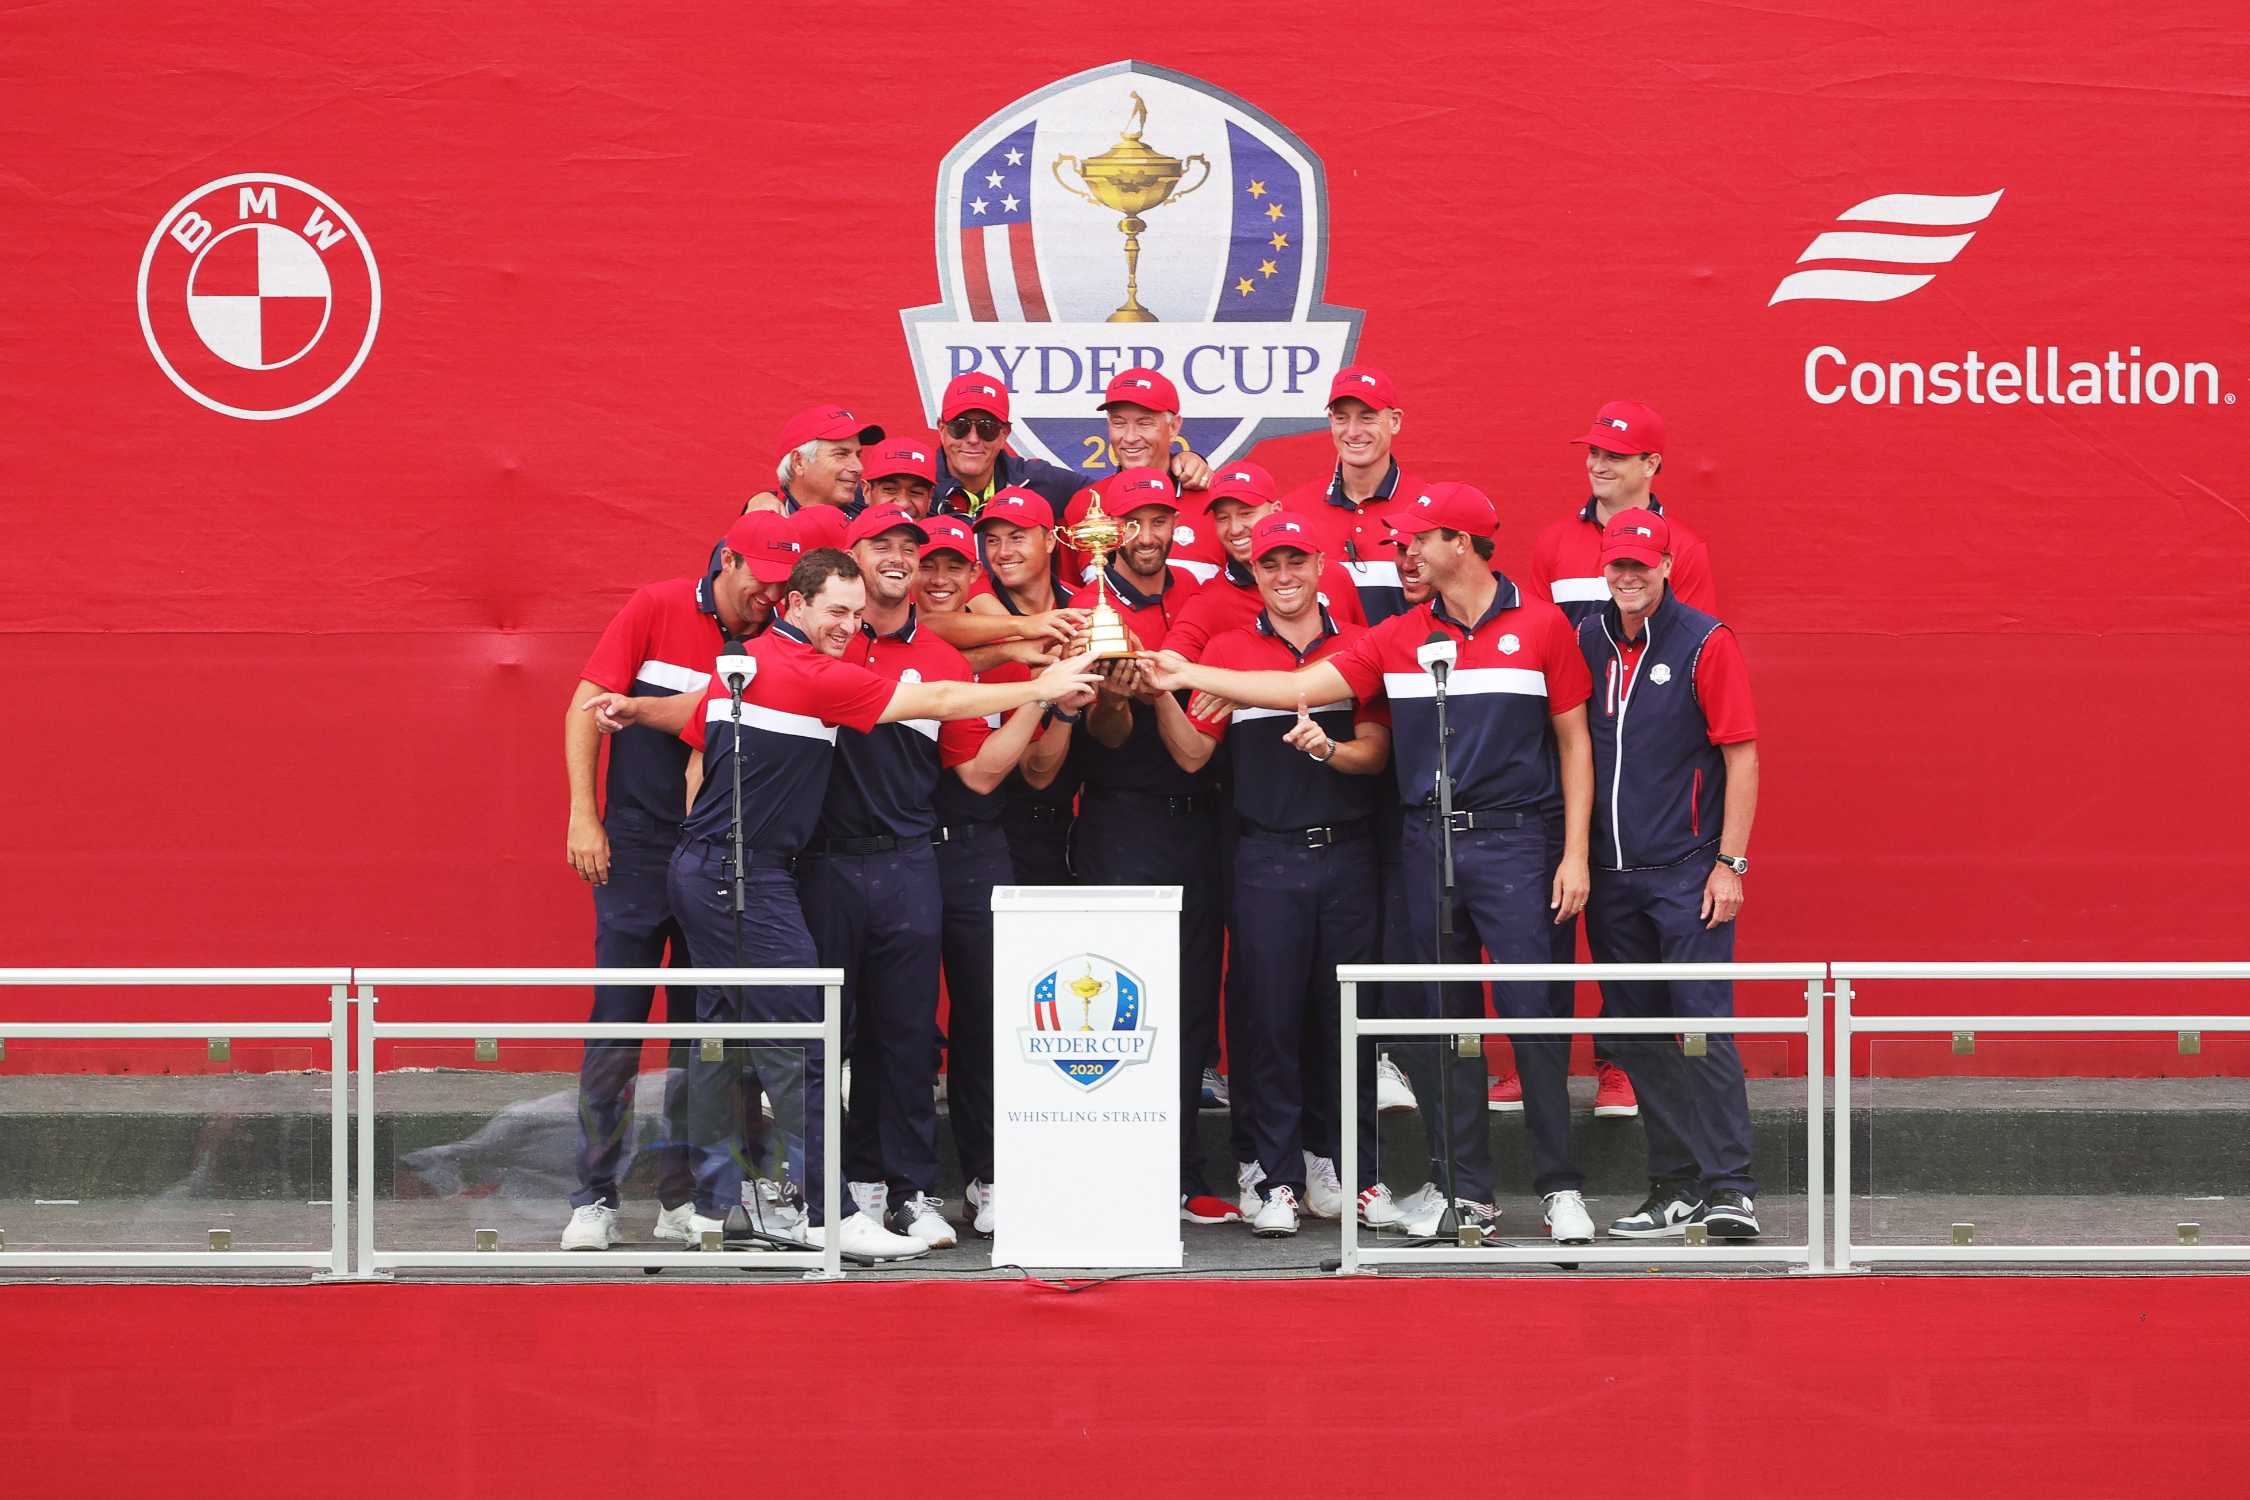 Ryder Cup 2021 Live Stream Free How To Watch Online